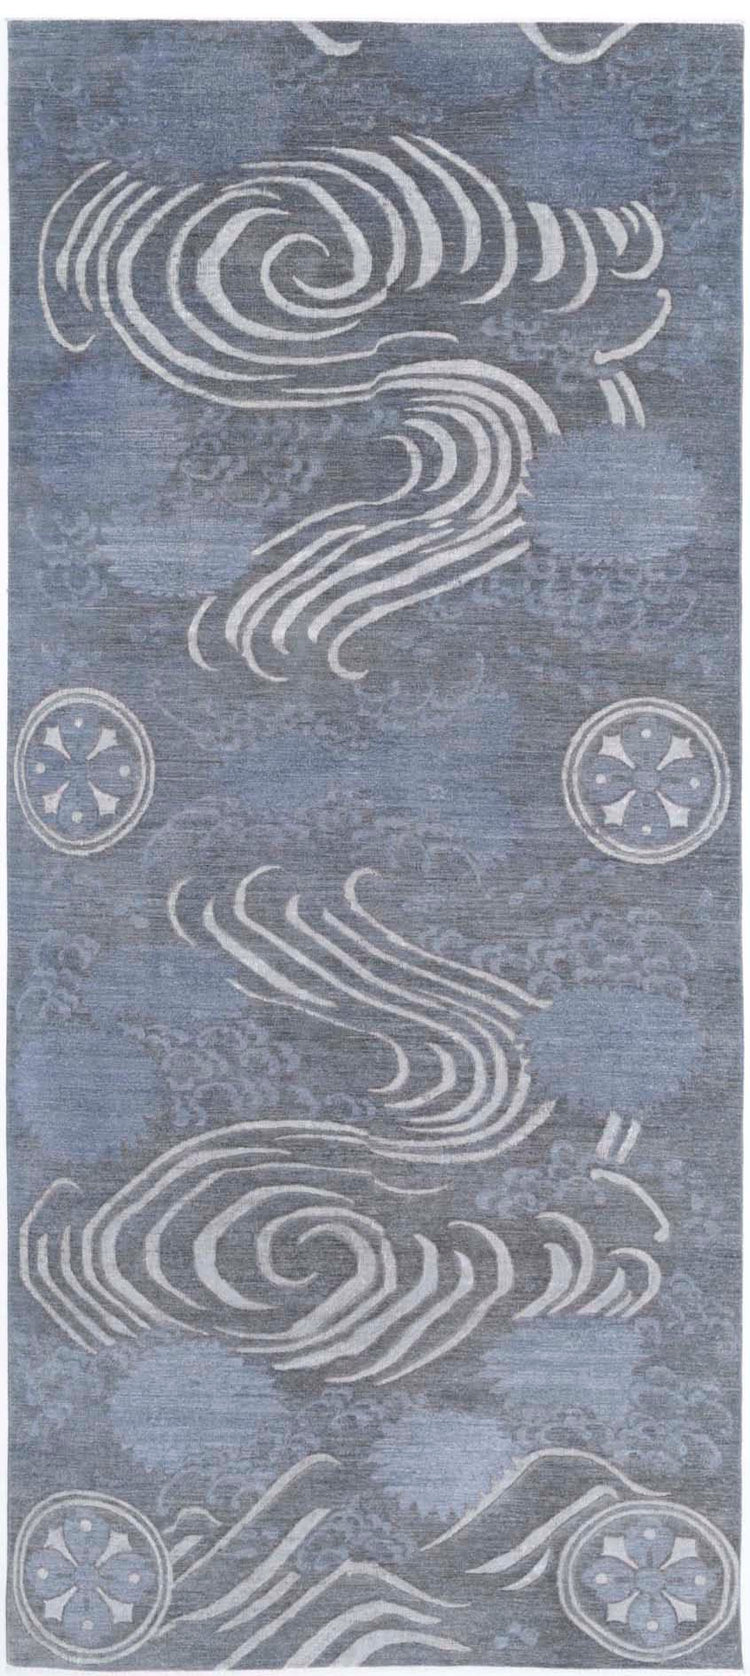 Hand Knotted Onyx Wool Rug - 6'2'' x 14'6''